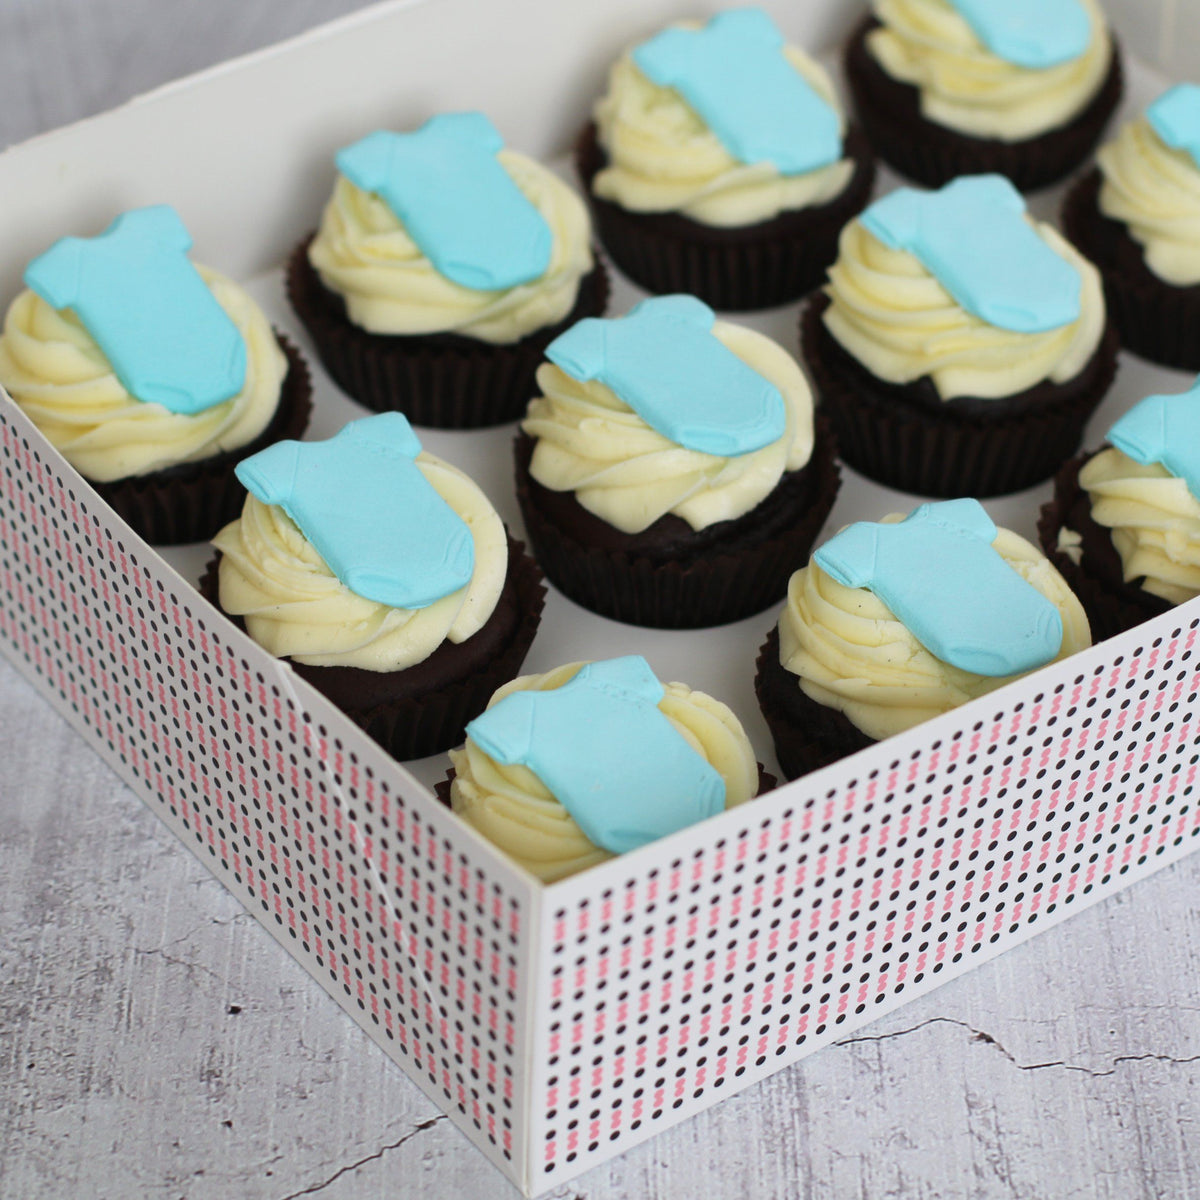 Baby Blue Jumpsuit Gluten Friendly Cupcakes The Cupcake Queens 